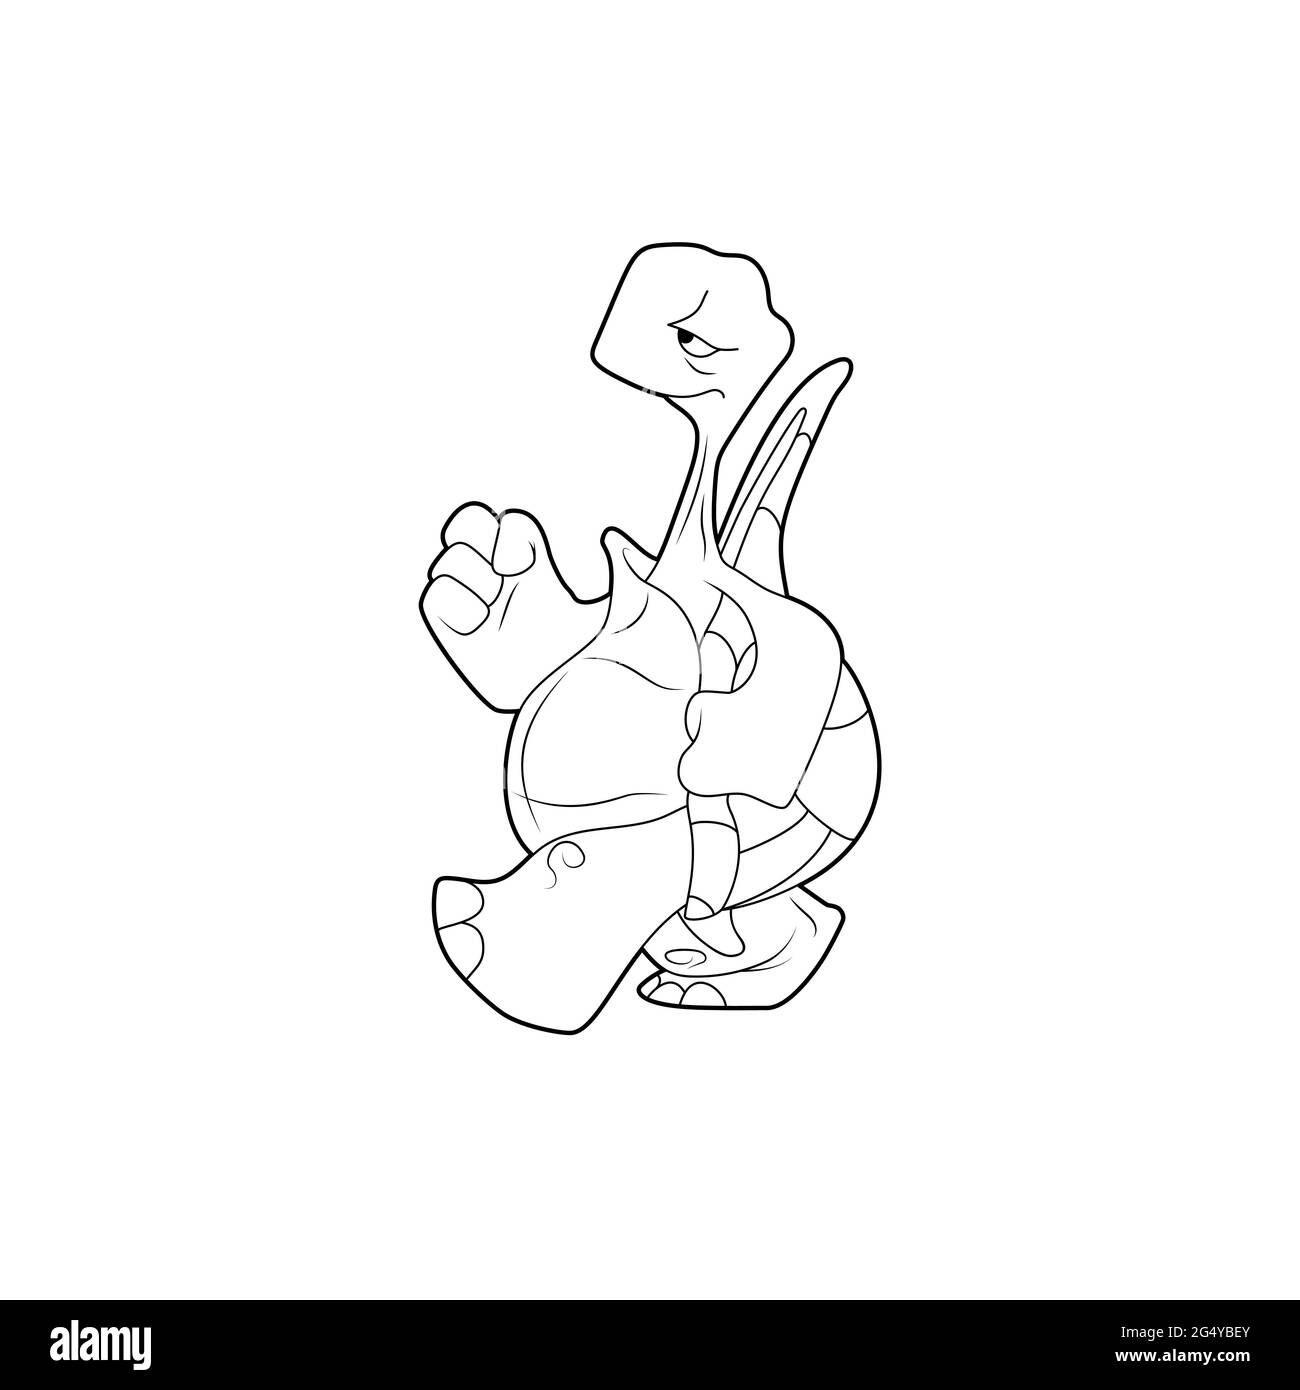 Coloring book for kids. Cartoon character. The turtle goes forward. Black contour silhouette. Isolated on white background. Animal theme. Vector illus Stock Vector